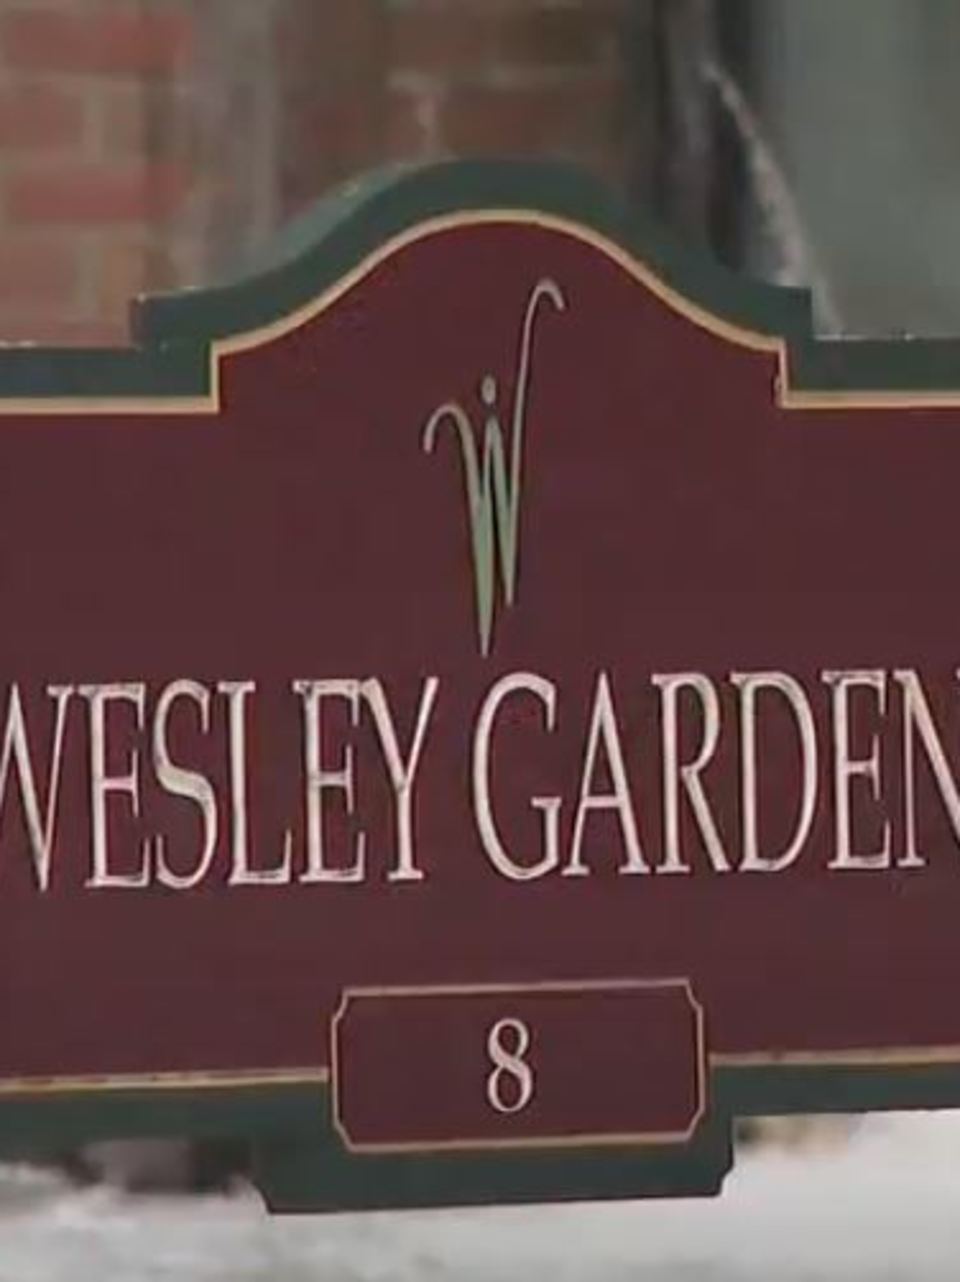 More Than 130 Wesley Gardens Employees Laid Off Wham